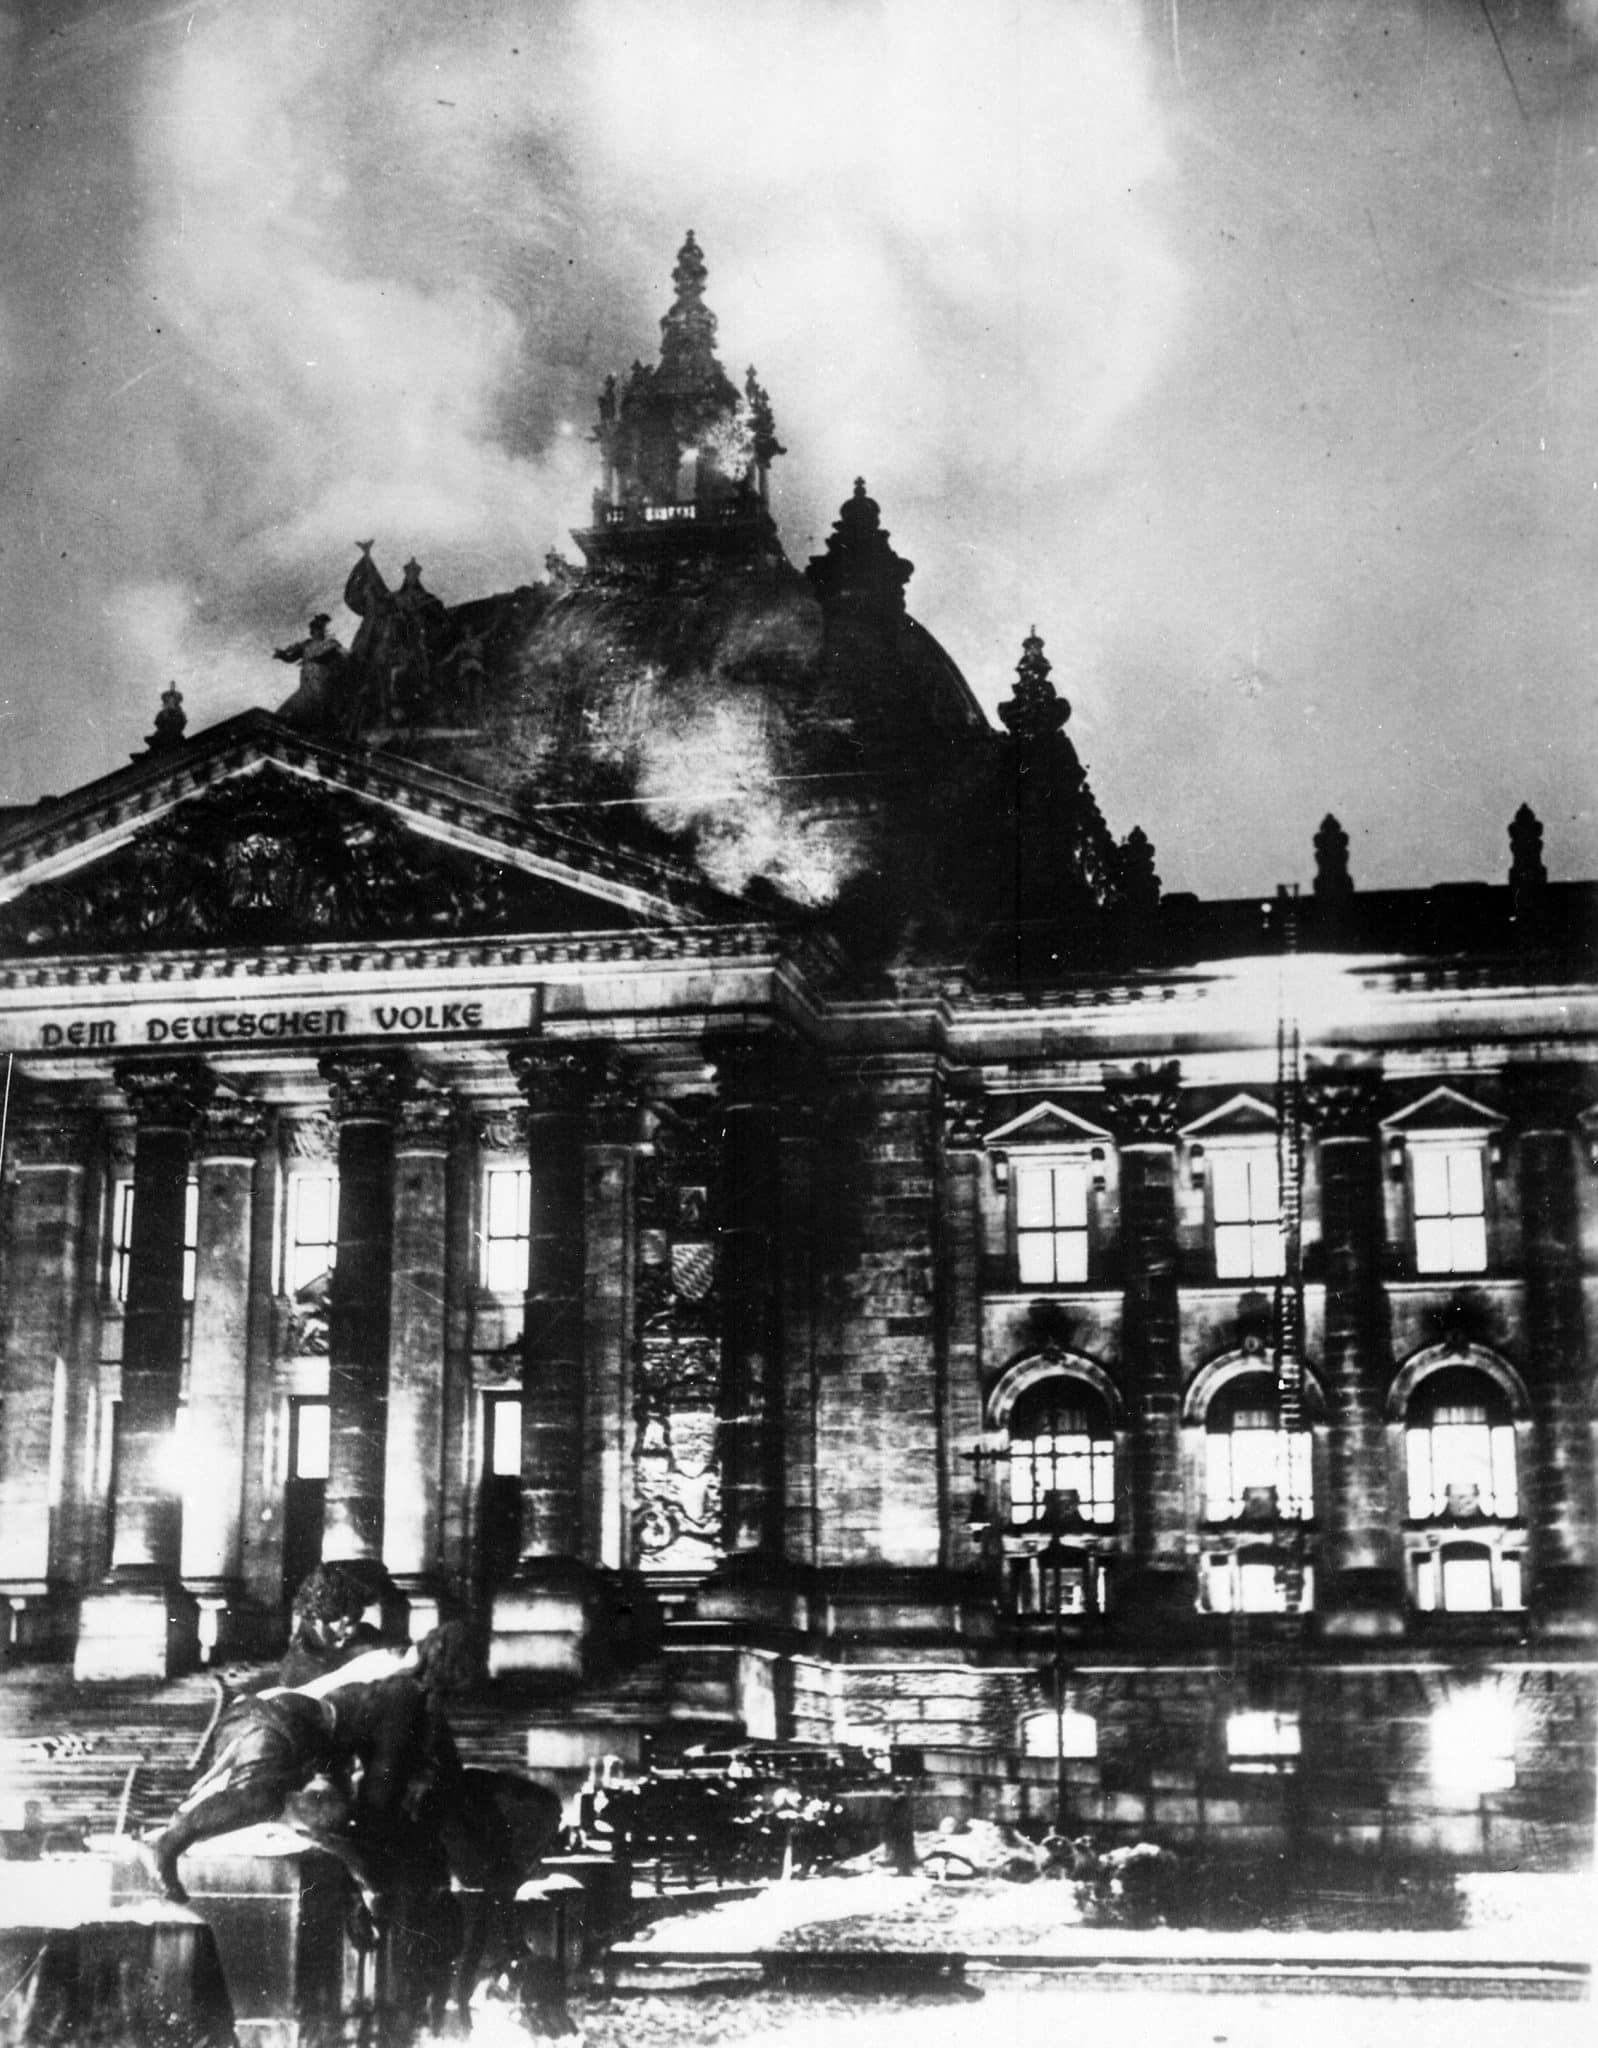 View of the Reichstag on fire from outside, February 27th 1933